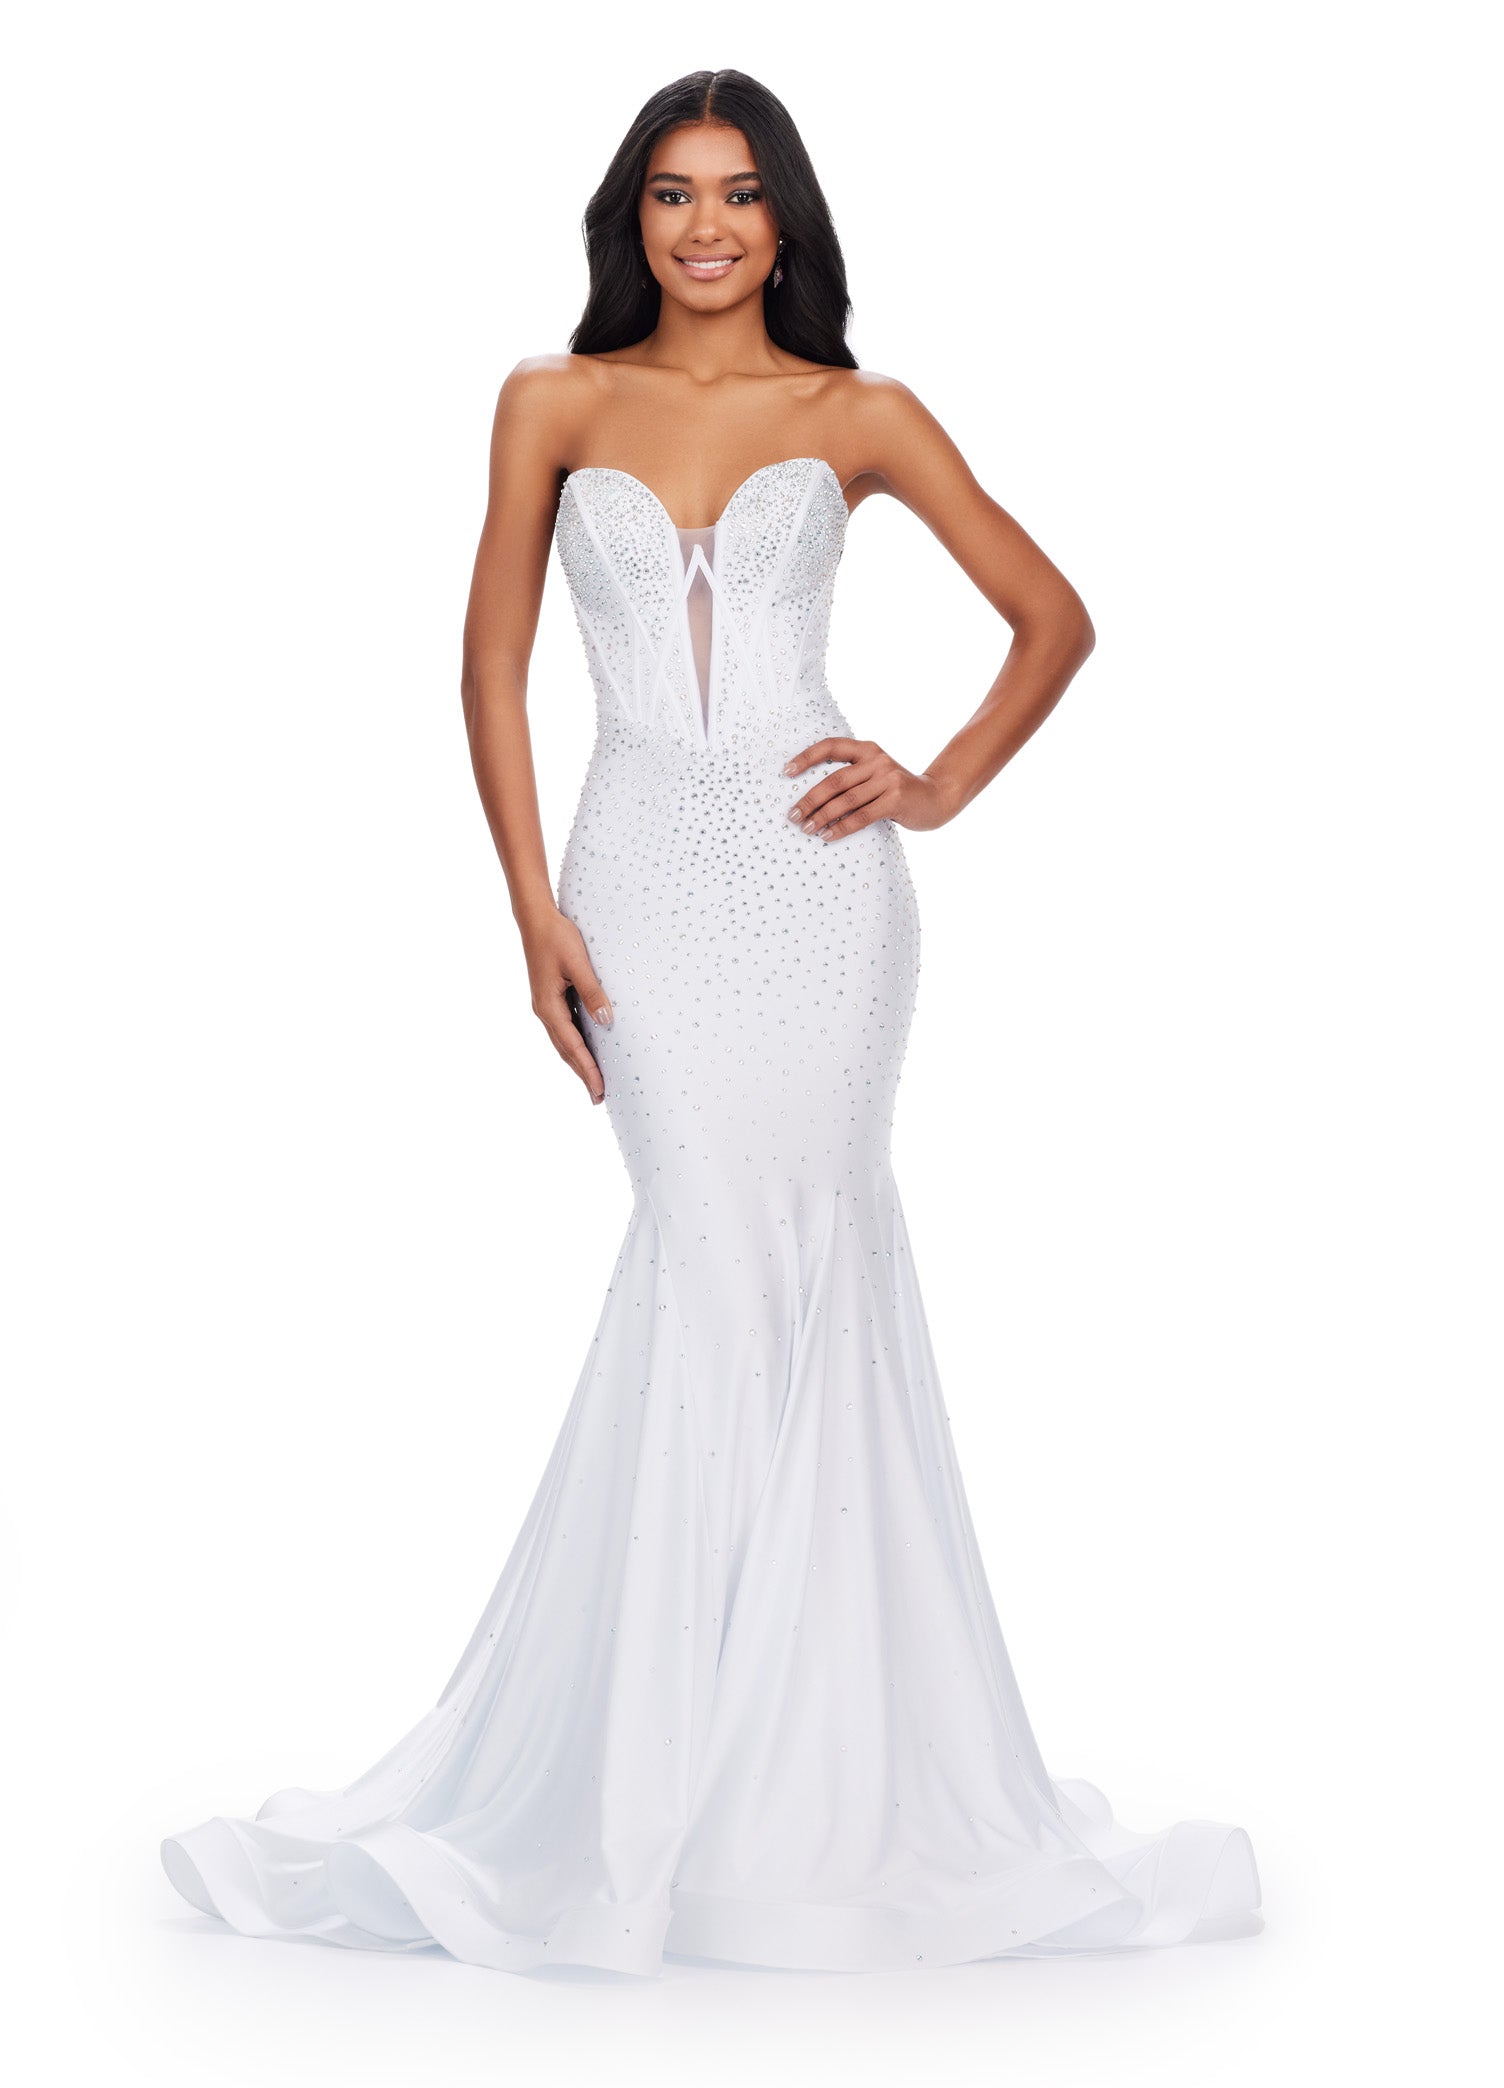 Julie, Strapless White and Black Ruched Mermaid Prom Dress